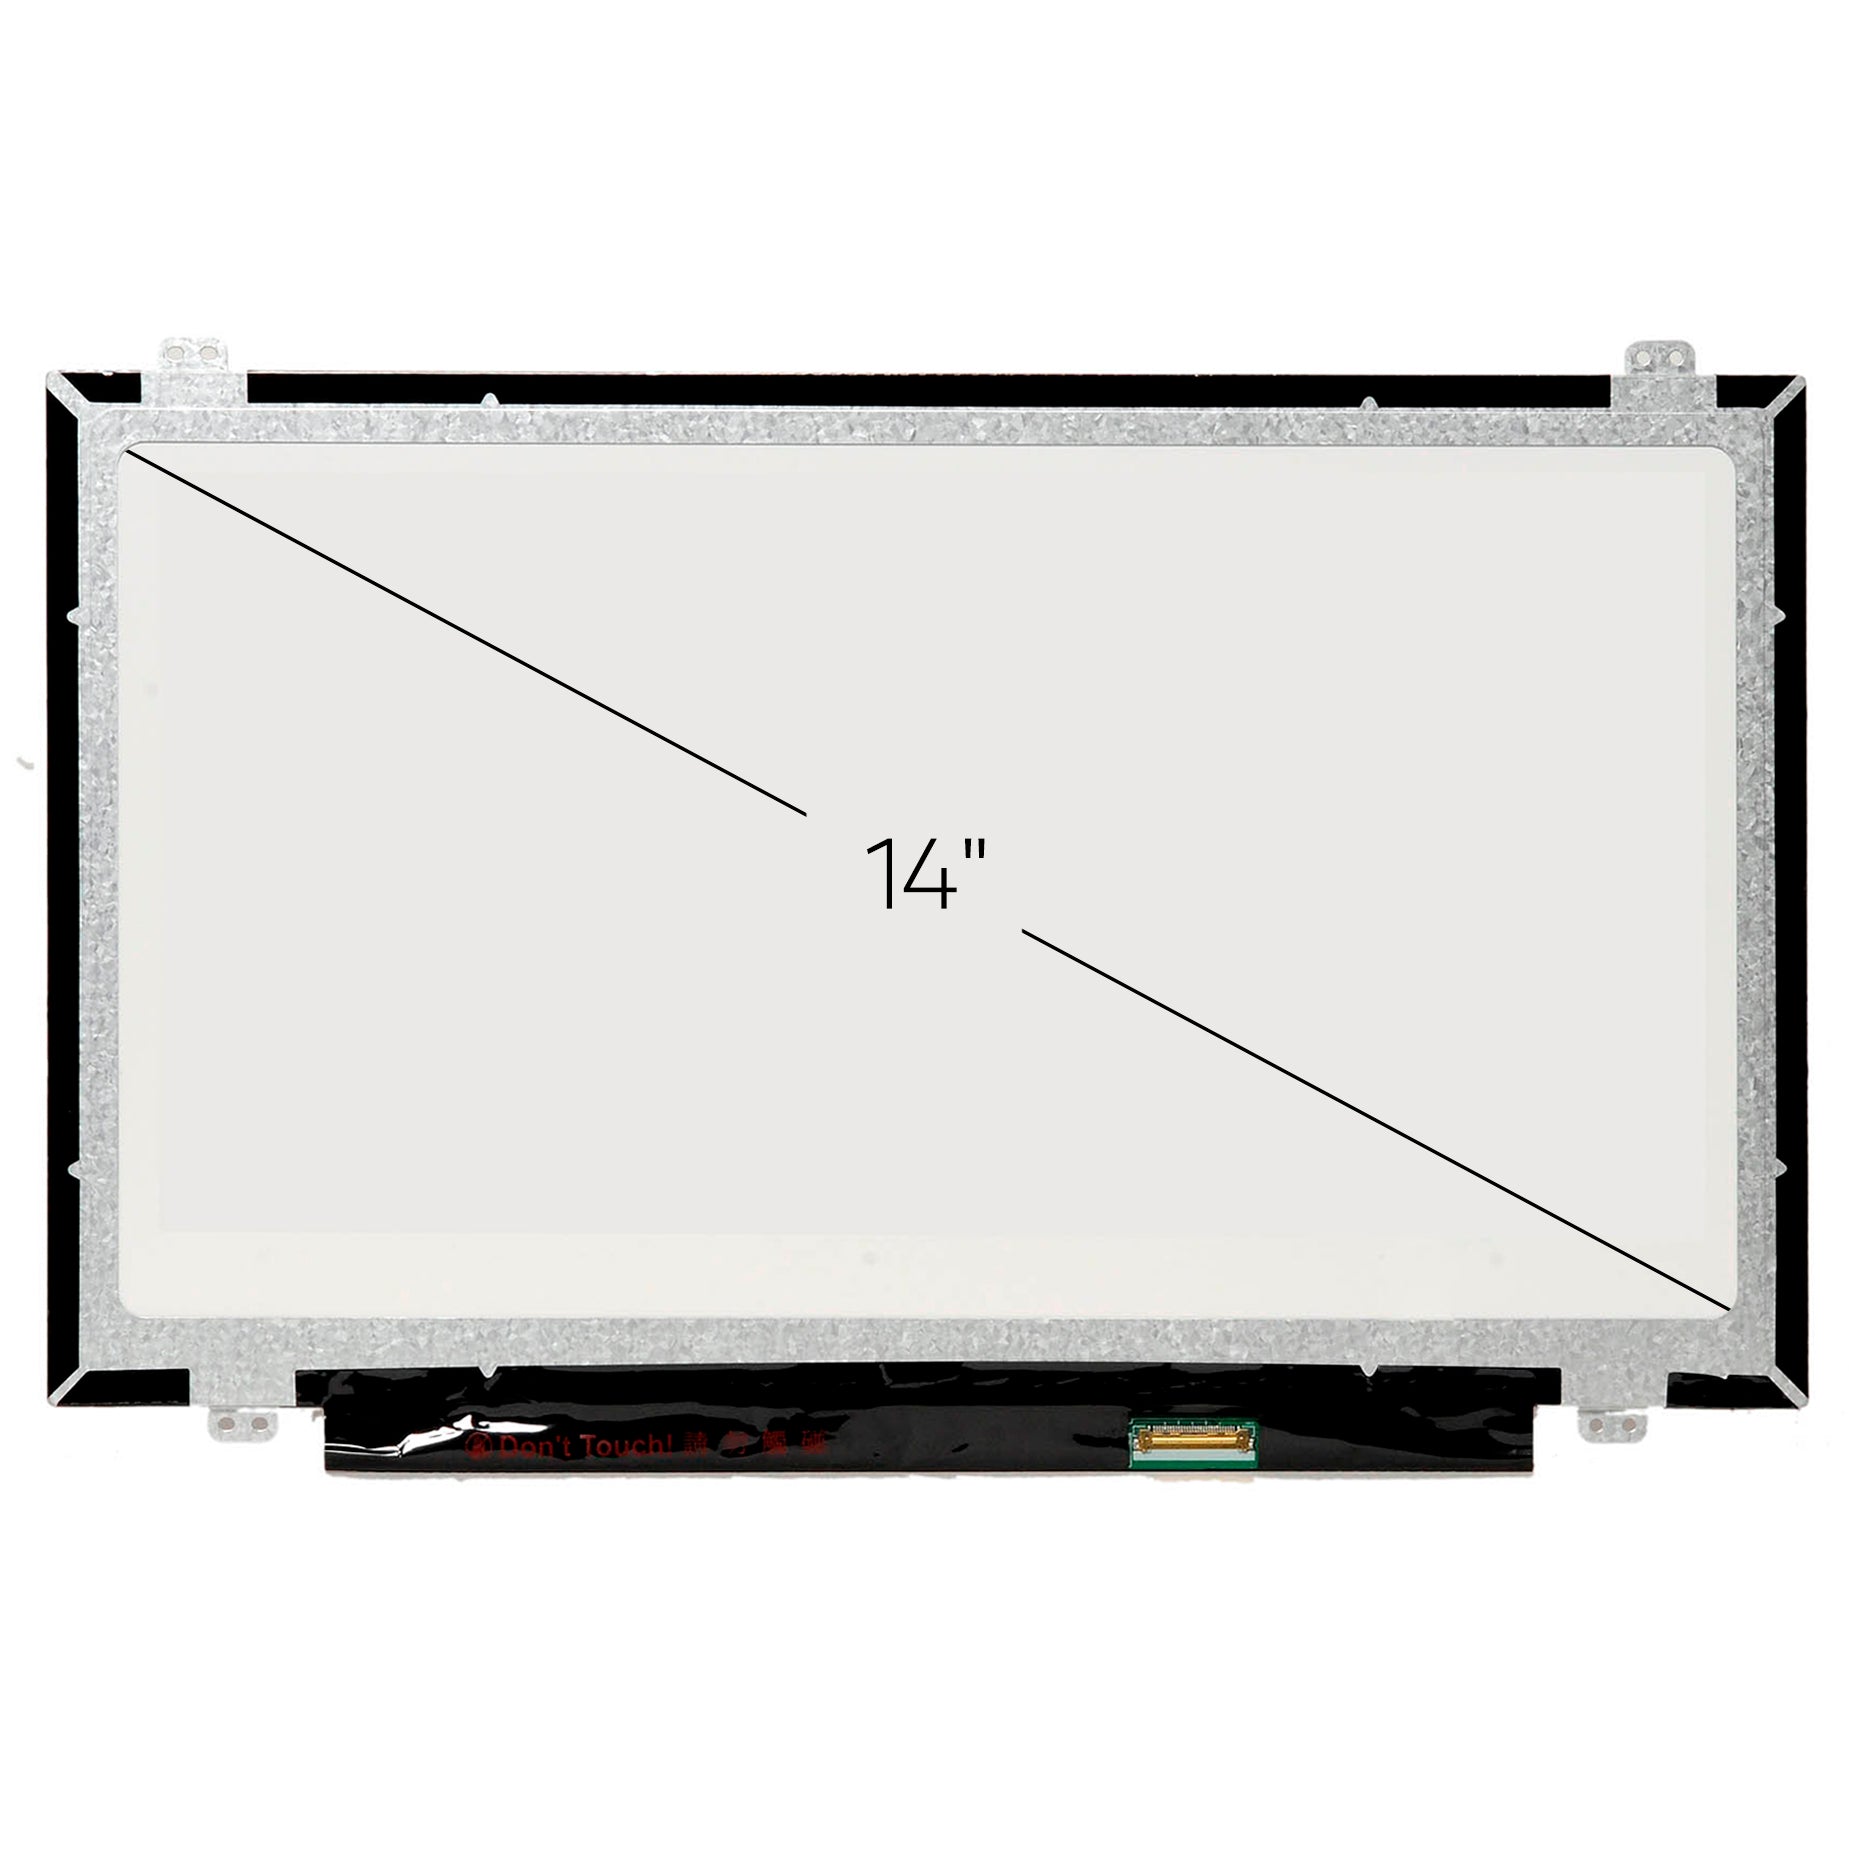 Screen Replacement for Lenovo Thinkpad A485 HD 1366x768 Glossy LCD LED Display